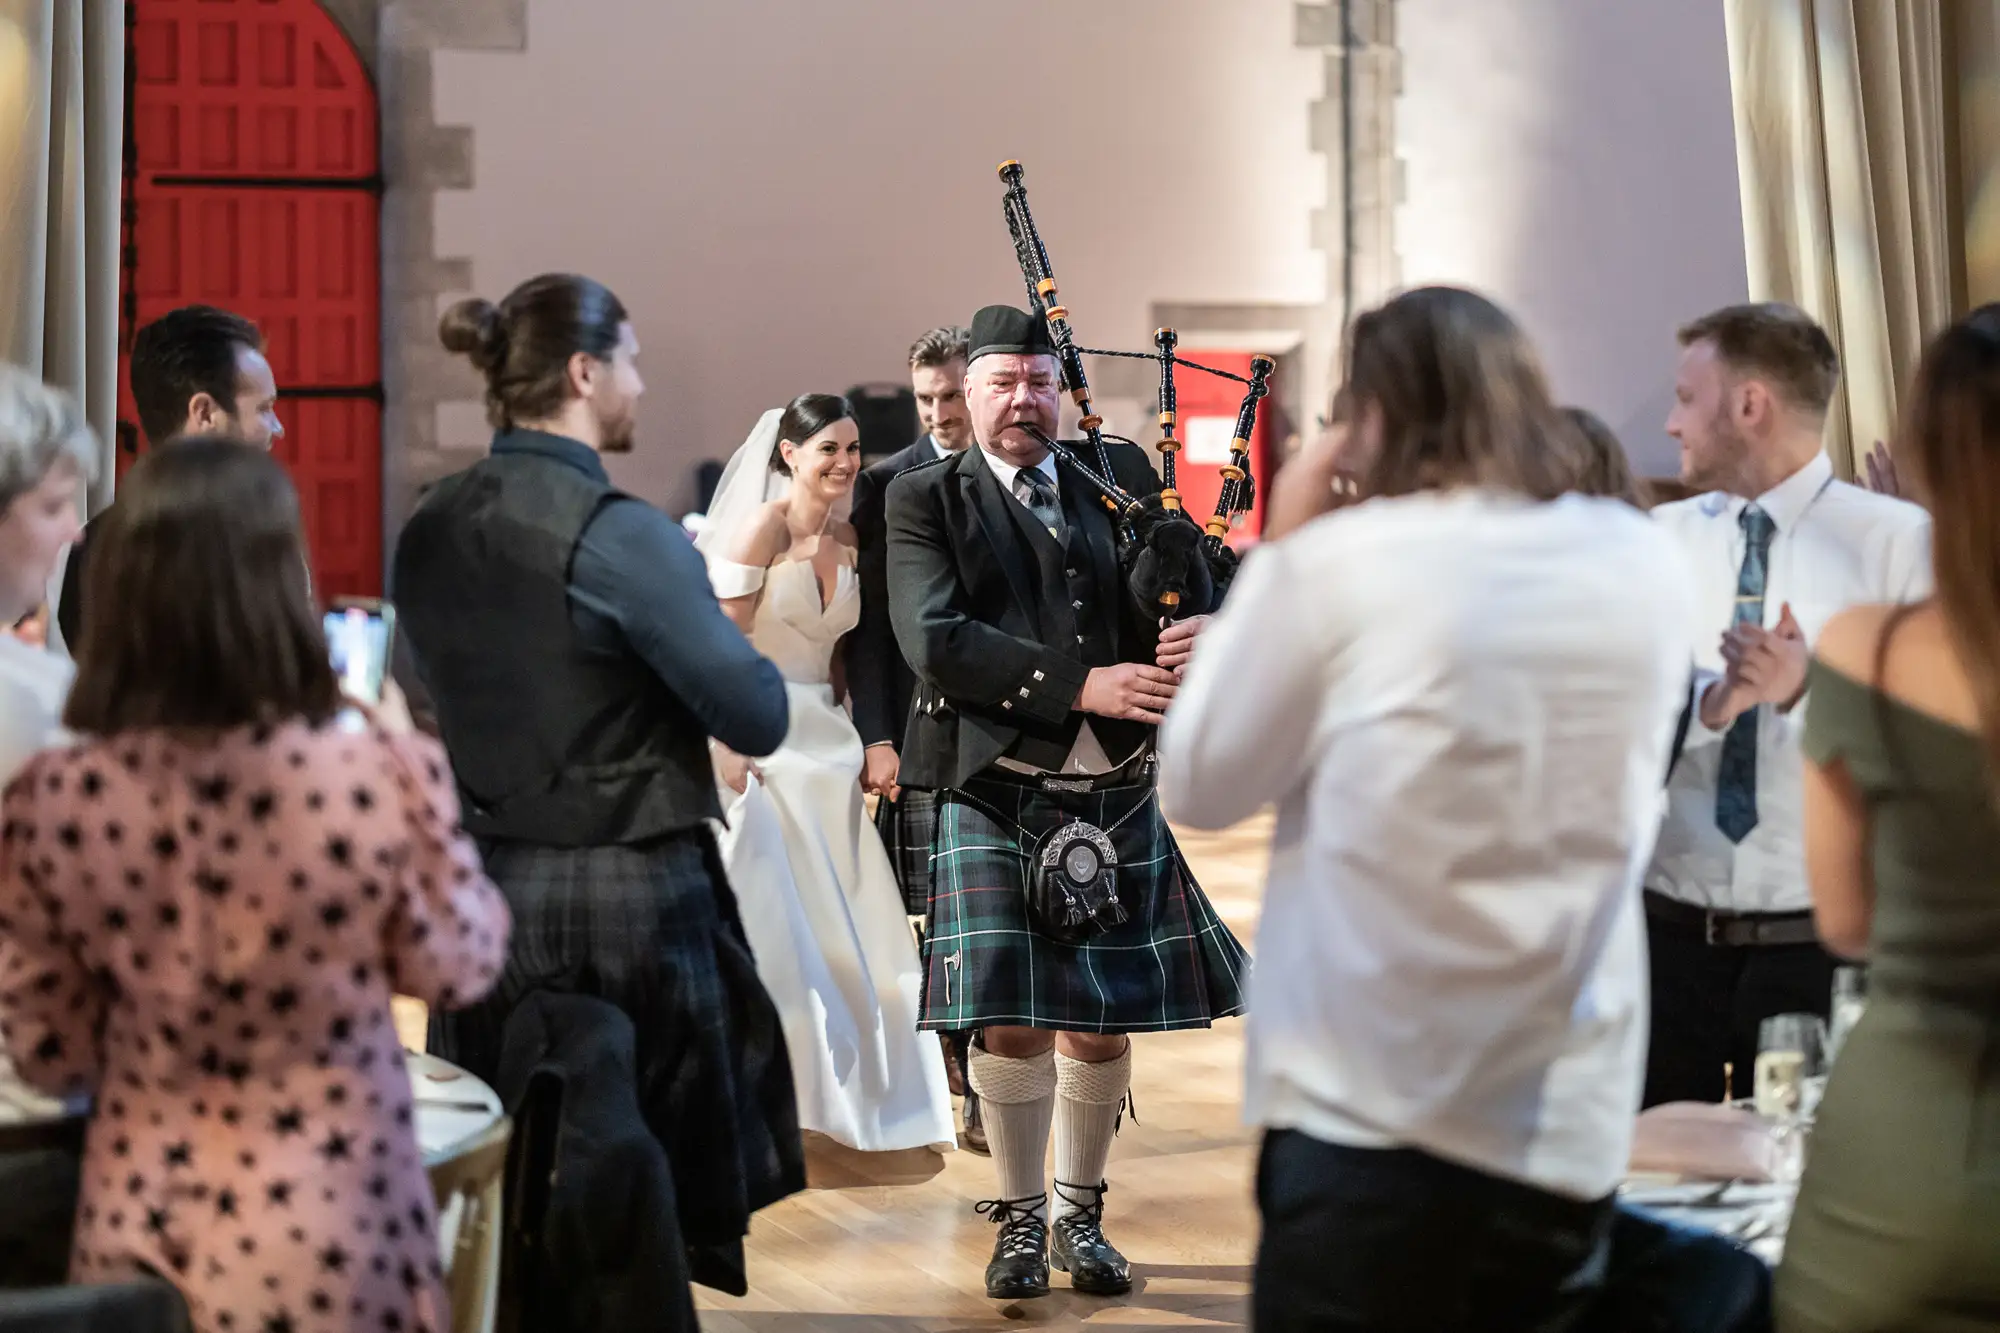 A bagpiper in traditional scottish attire performs at a wedding, with guests and a smiling bride and groom watching in the background.